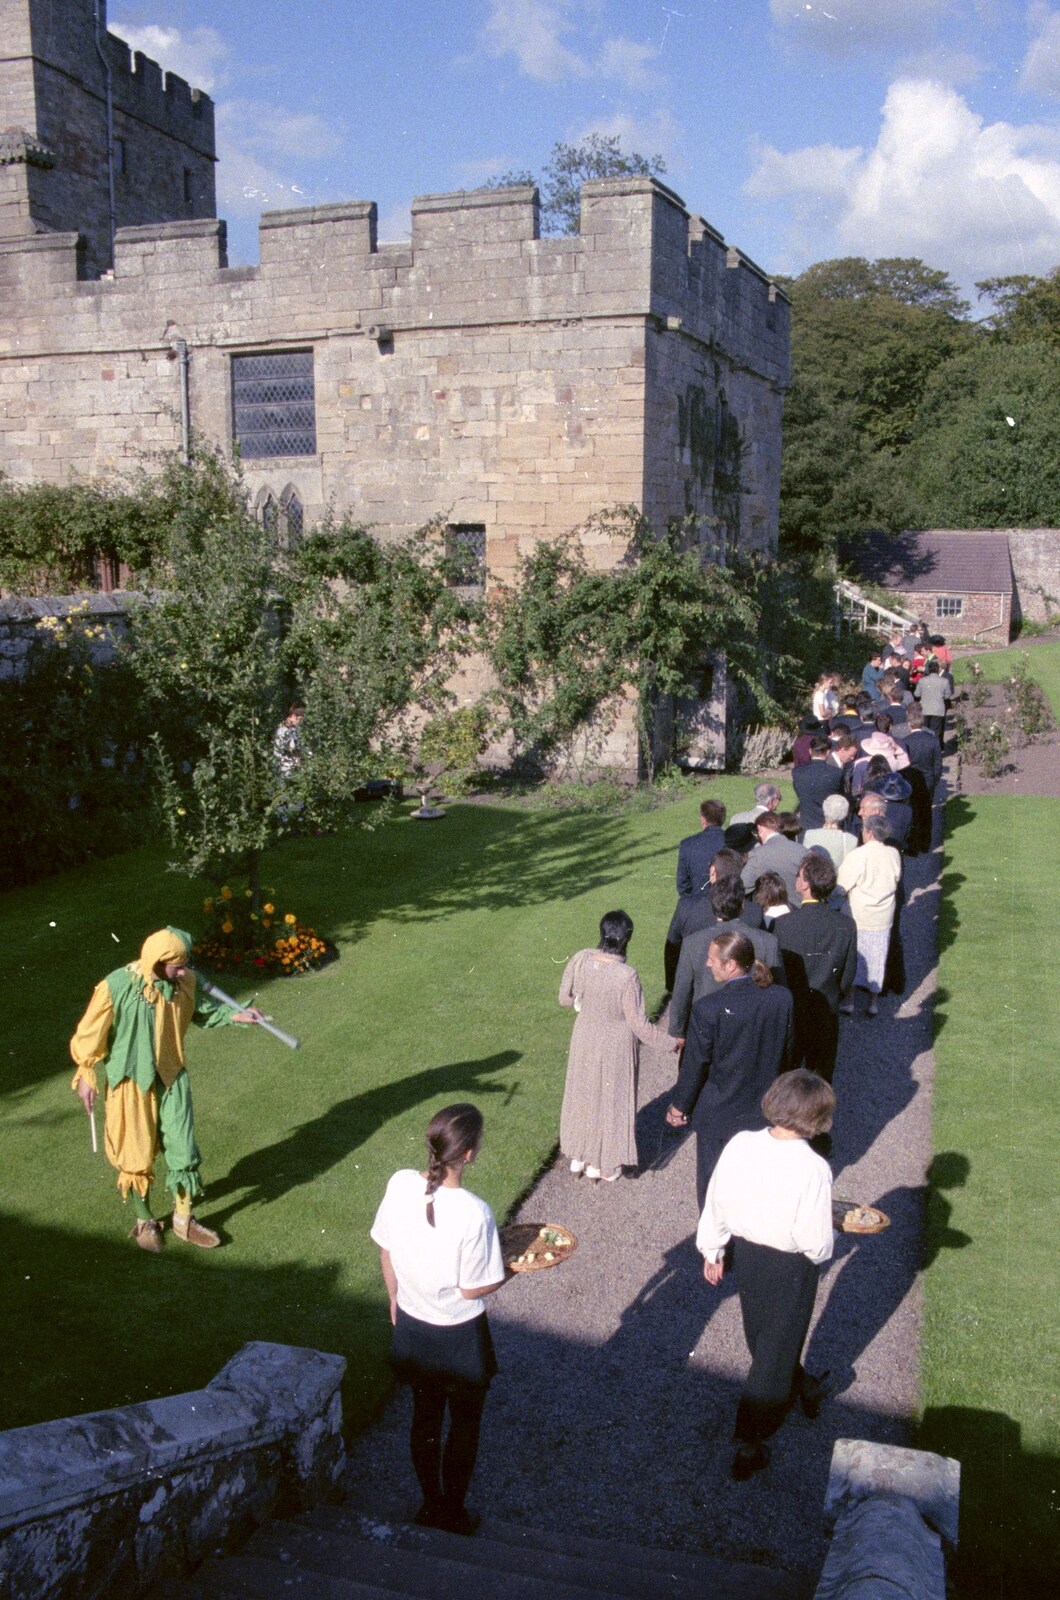 Stuart and Sarah's CISU Wedding, Naworth Castle, Brampton, Cumbria - 21st September 1996: A jester does his thing in the gardens